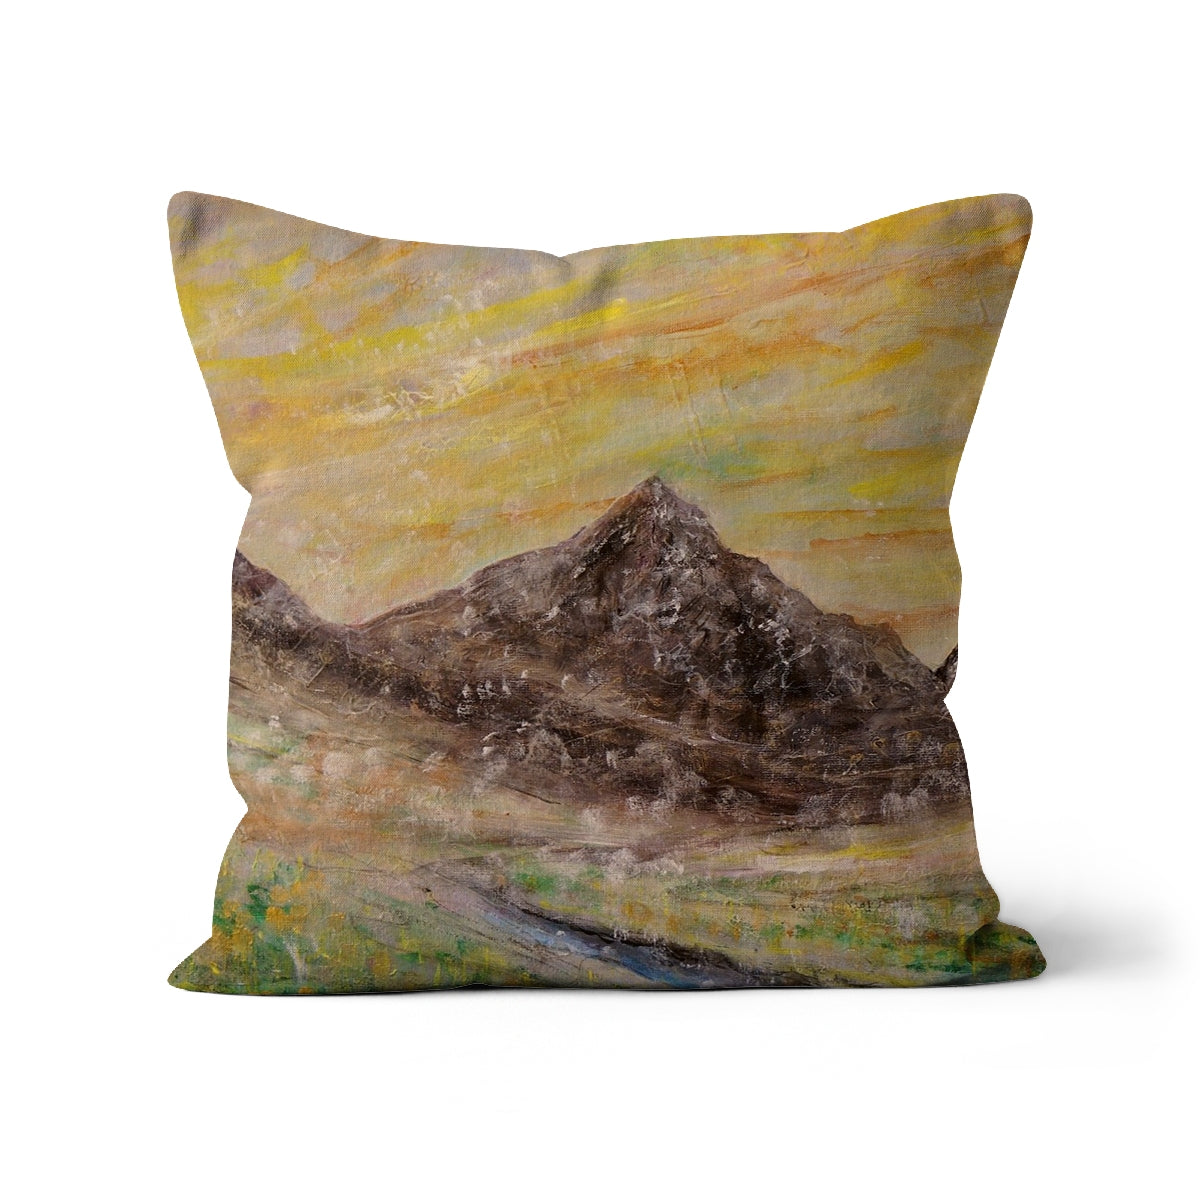 Glen Rosa Mist Arran Art Gifts Cushion-Cushions-Arran Art Gallery-Faux Suede-18"x18"-Paintings, Prints, Homeware, Art Gifts From Scotland By Scottish Artist Kevin Hunter